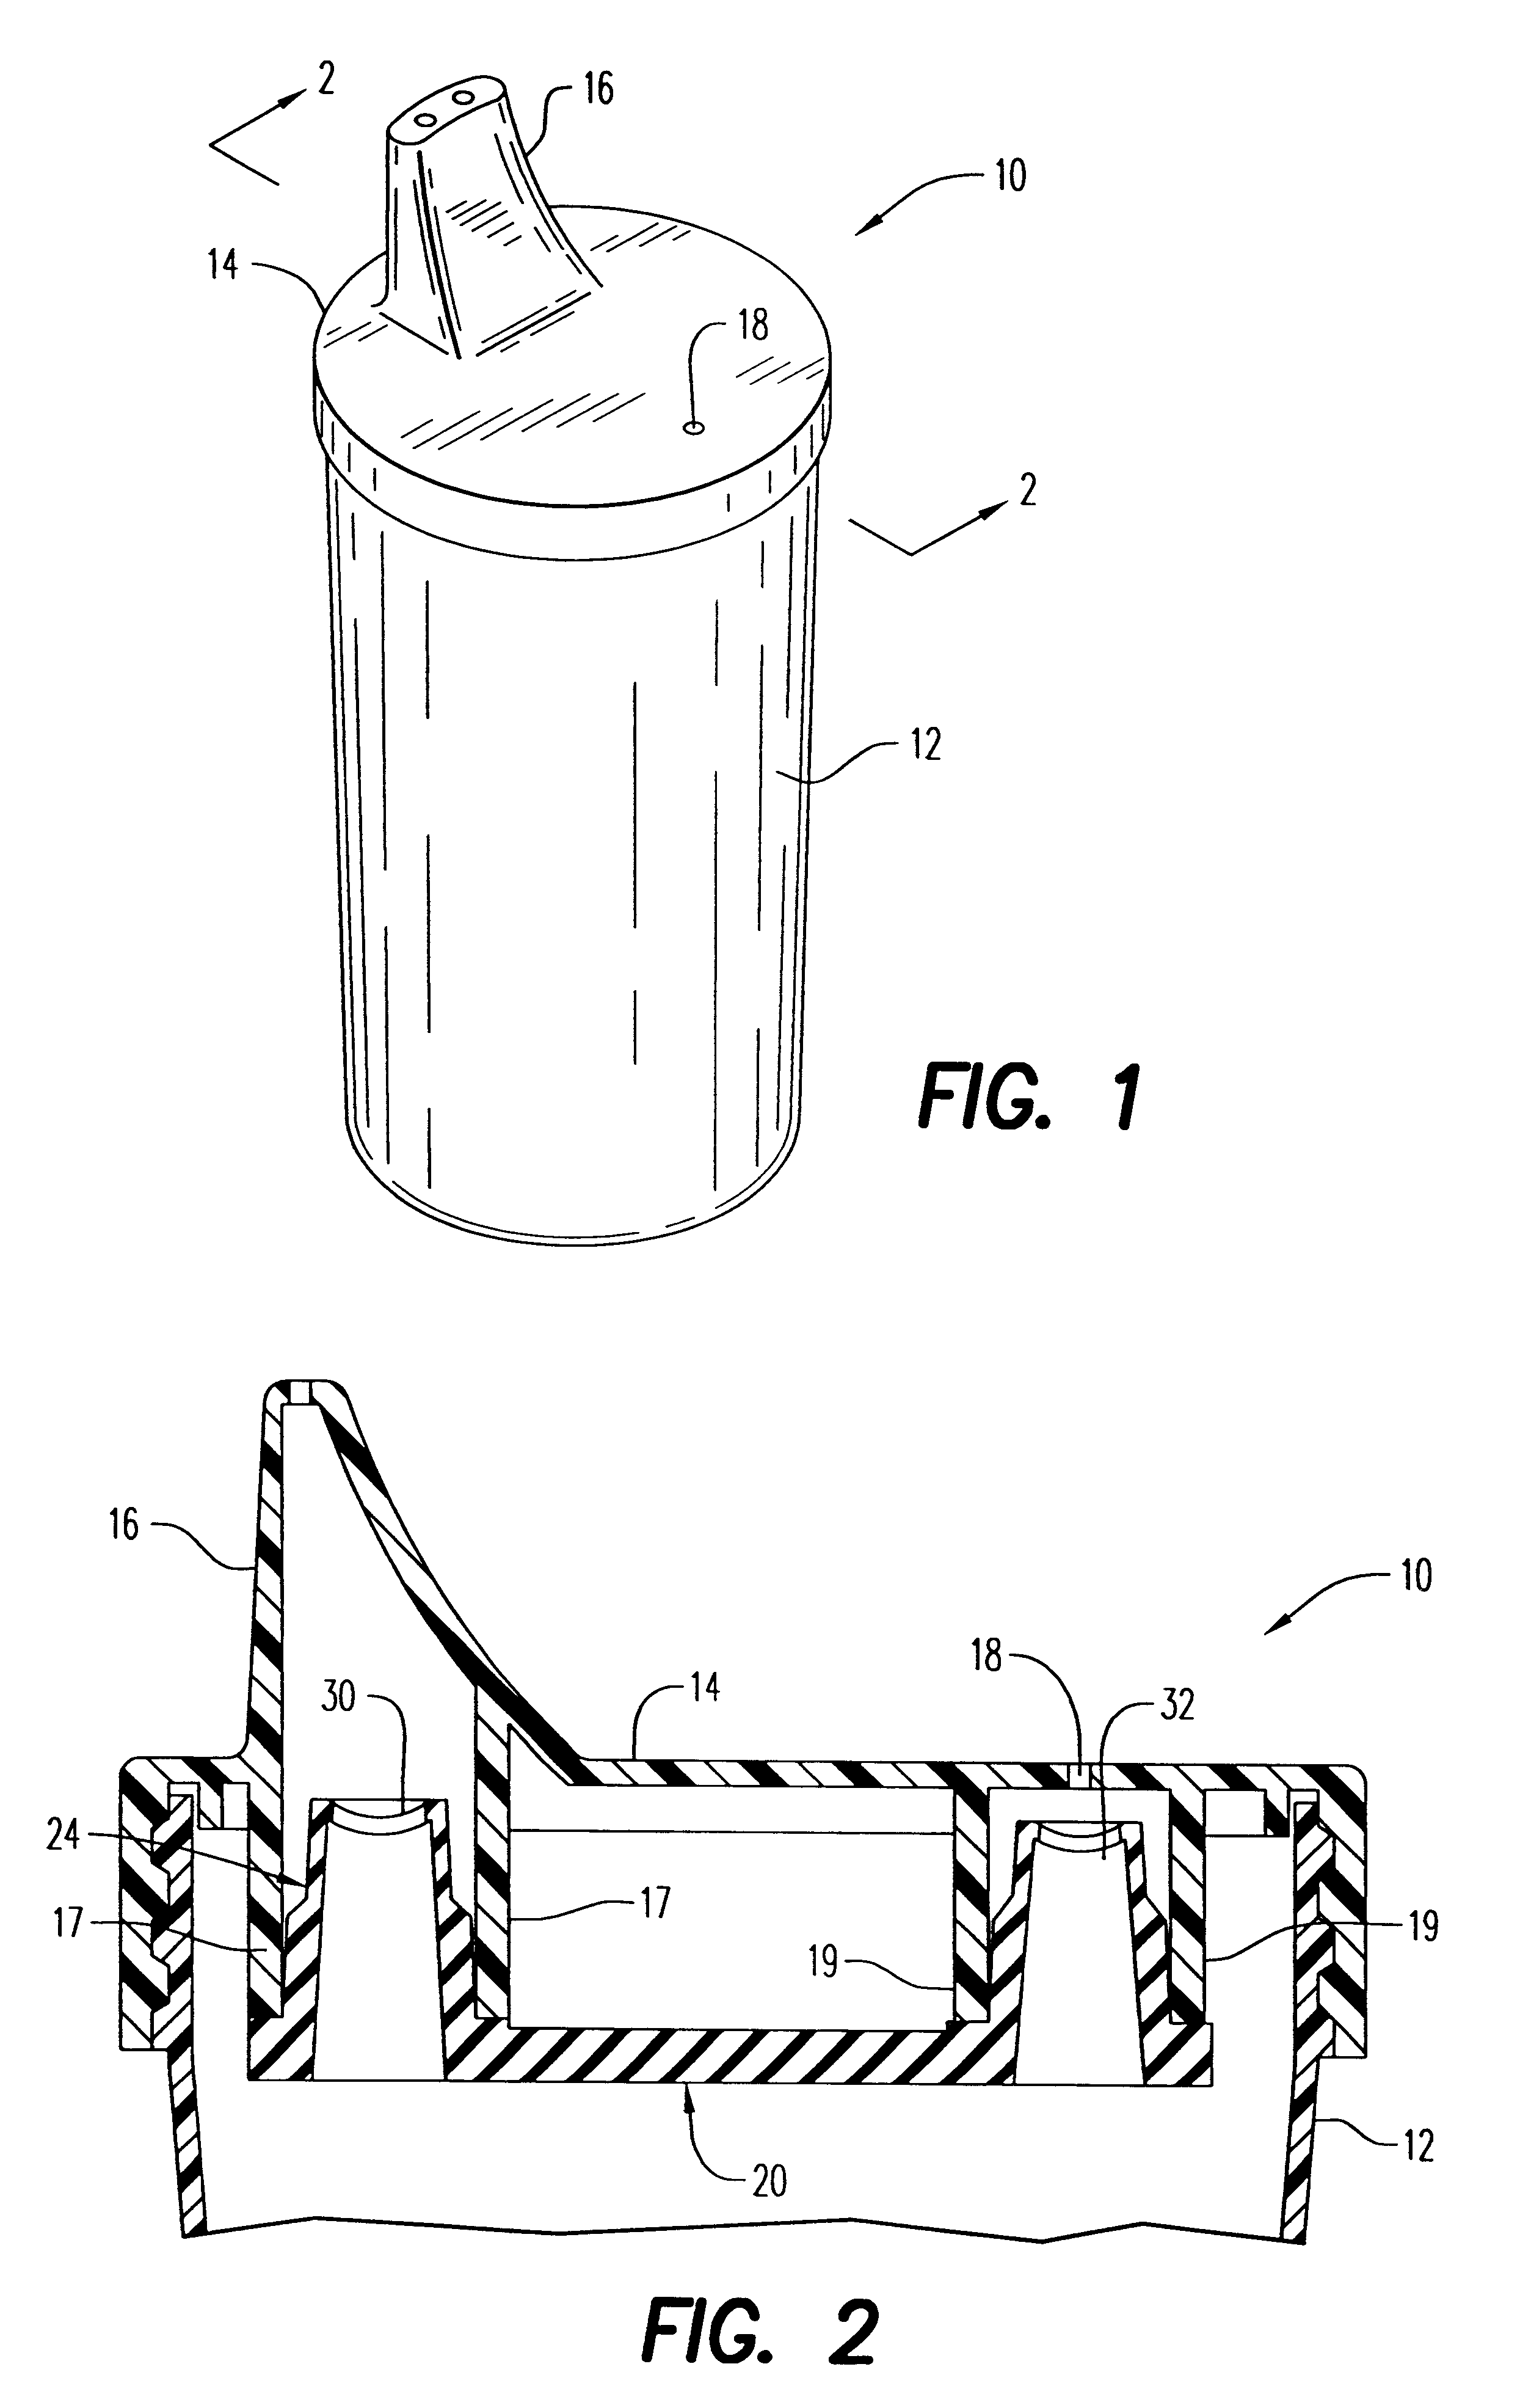 Cup assembly with retaining mechanism